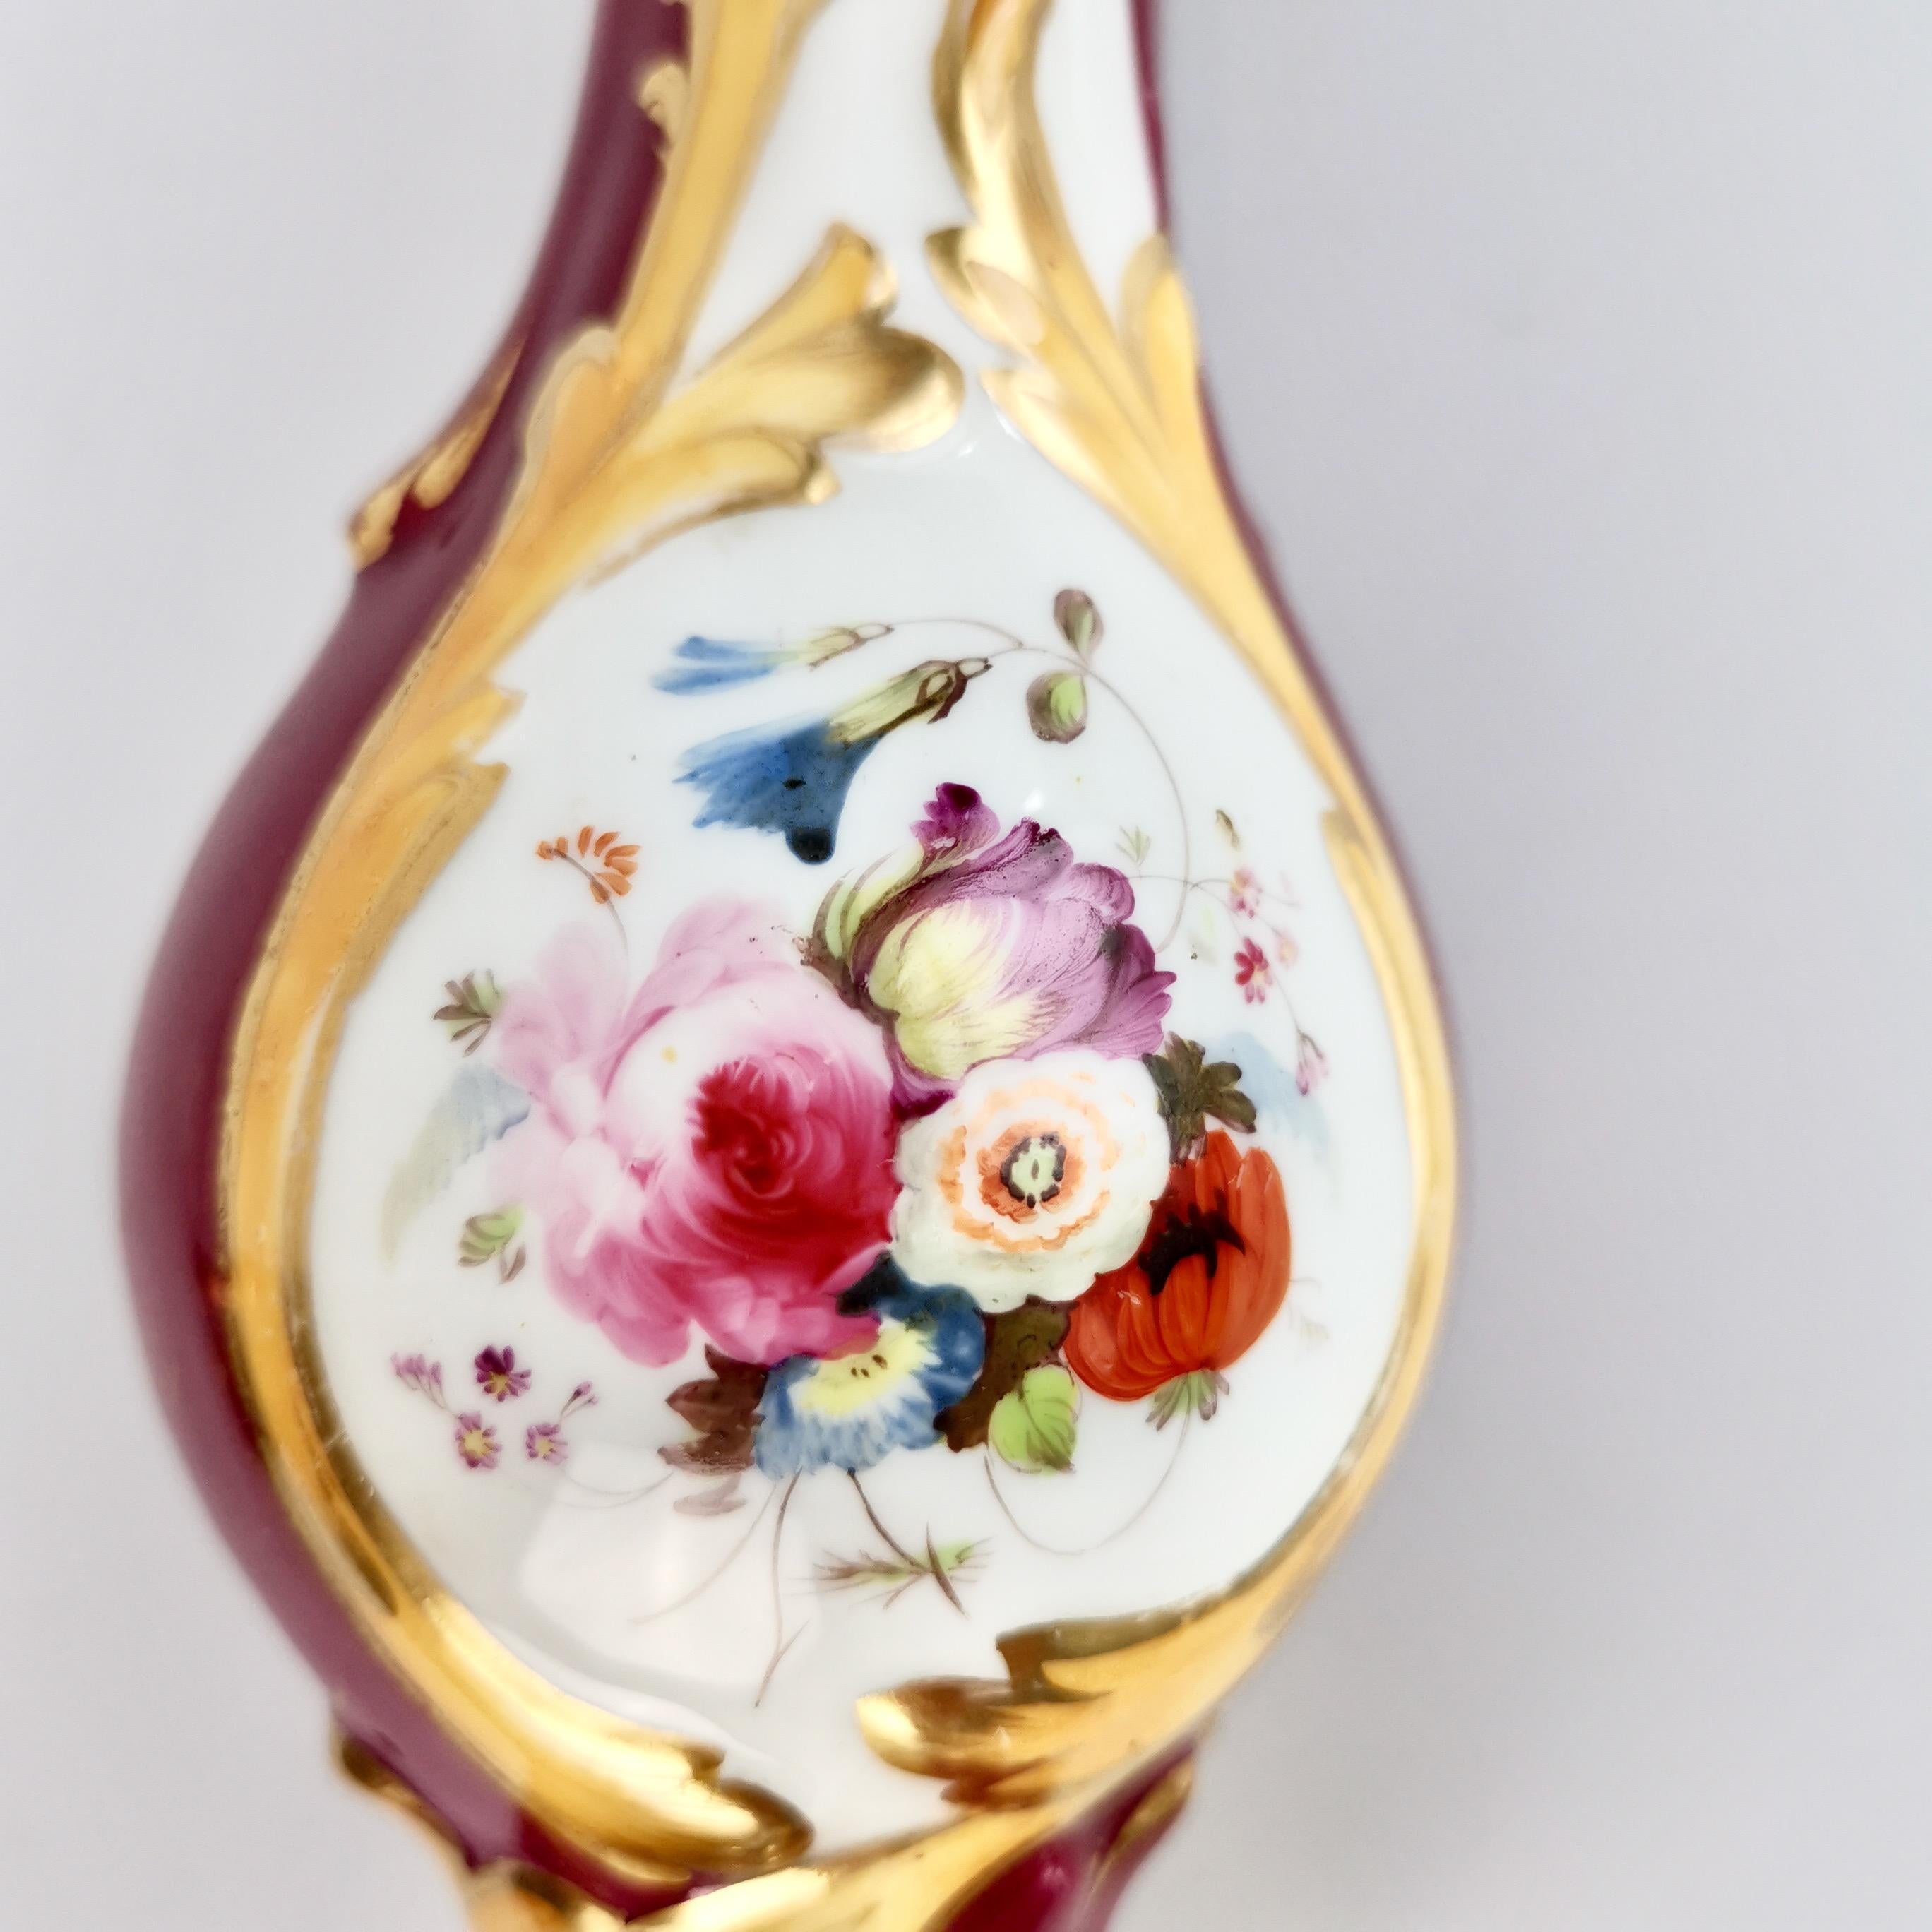 Mid-19th Century Samuel Alcock Small Porcelain Vase, Maroon with Flowers, Rococo Revival